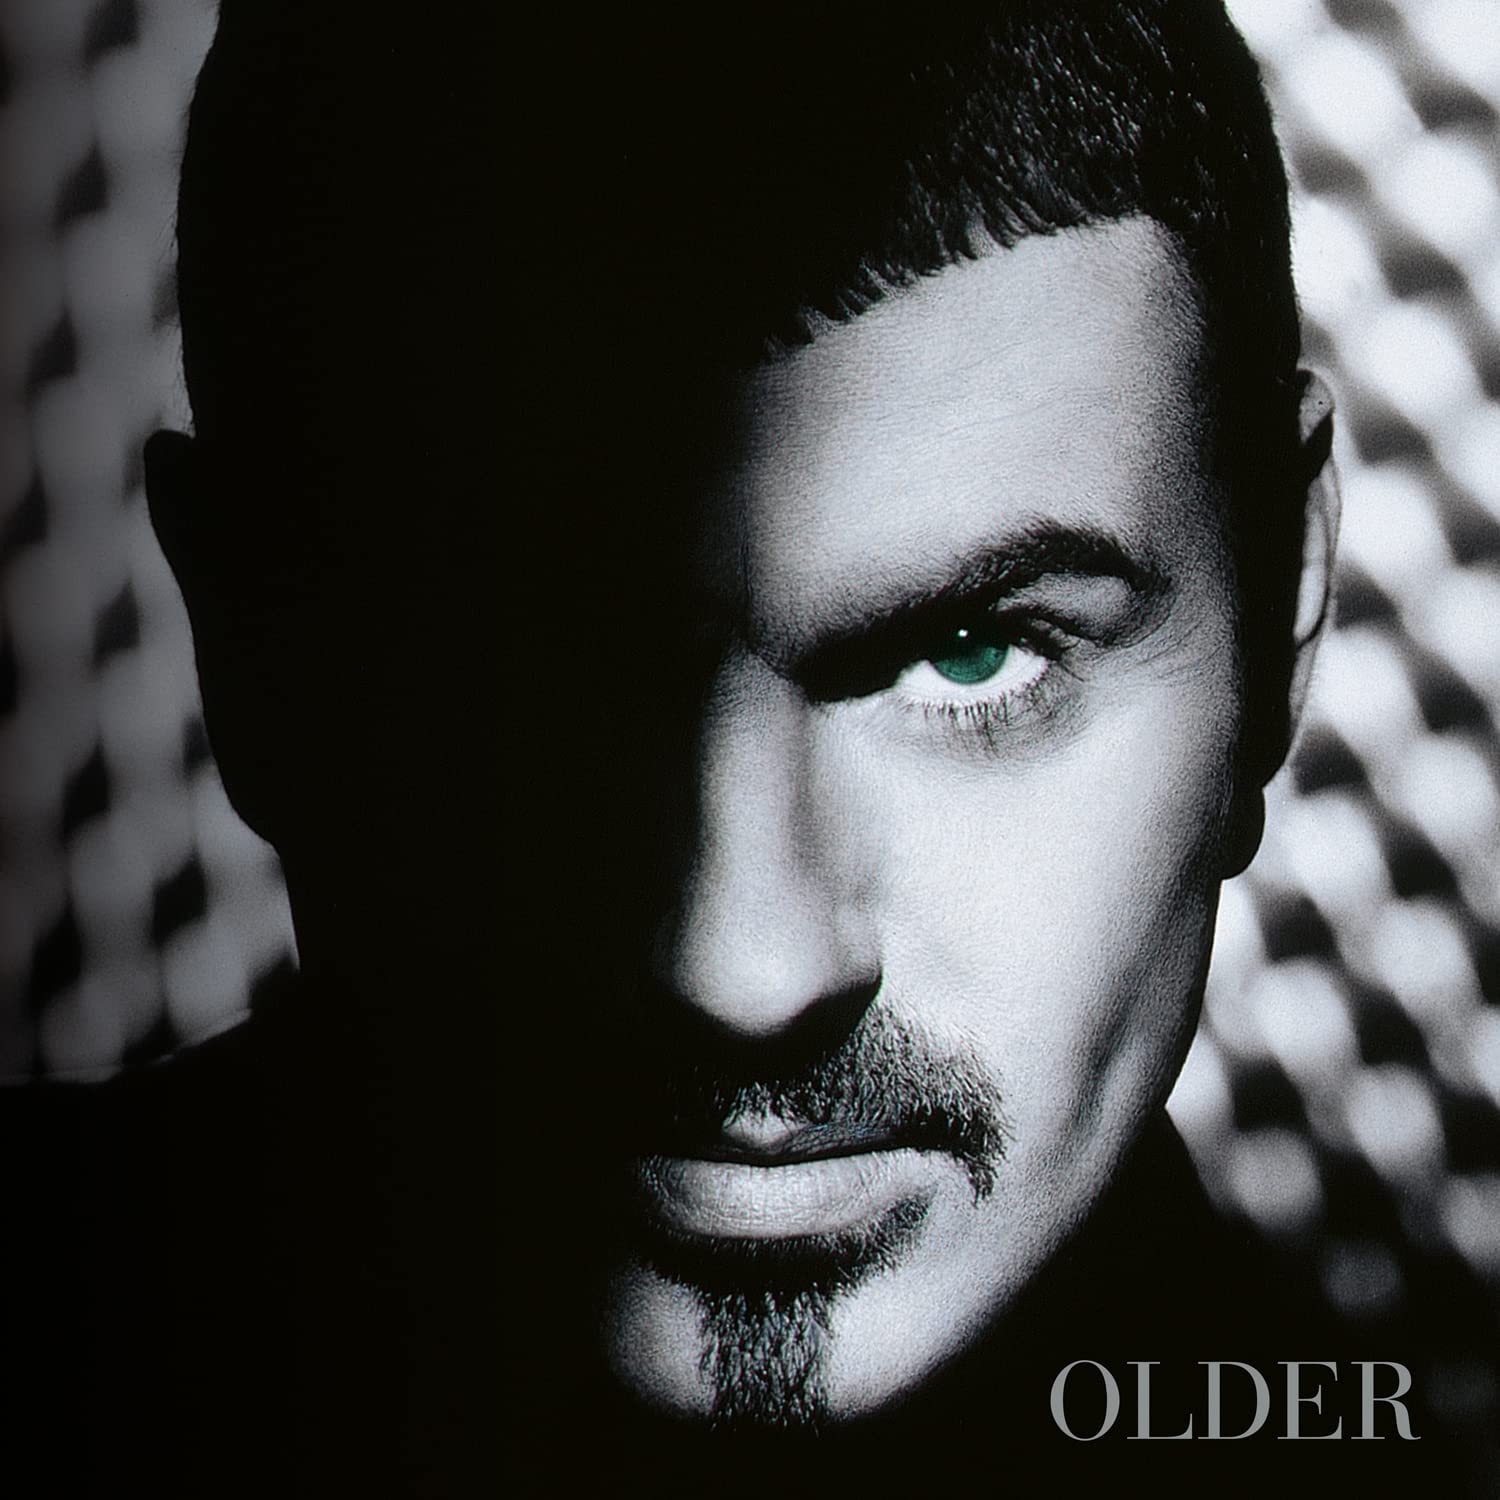 Japan offers a 2CD edition of George Michael Older reissue – SuperDeluxeEdition